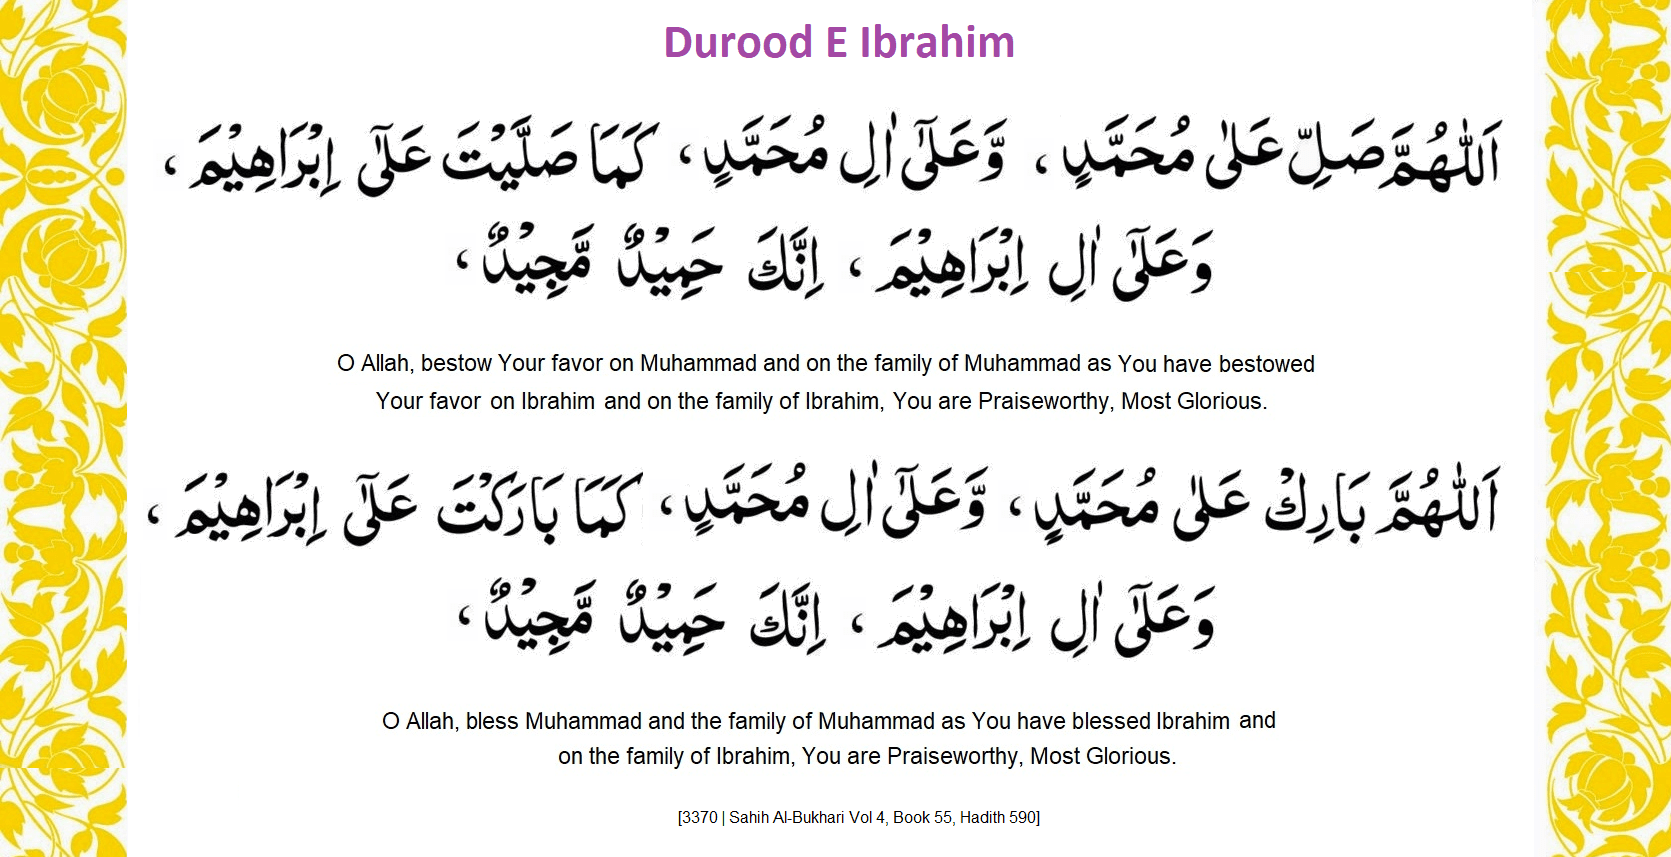 DuroodEIbrahim 1 - Friday is Here - You Know What to Read?